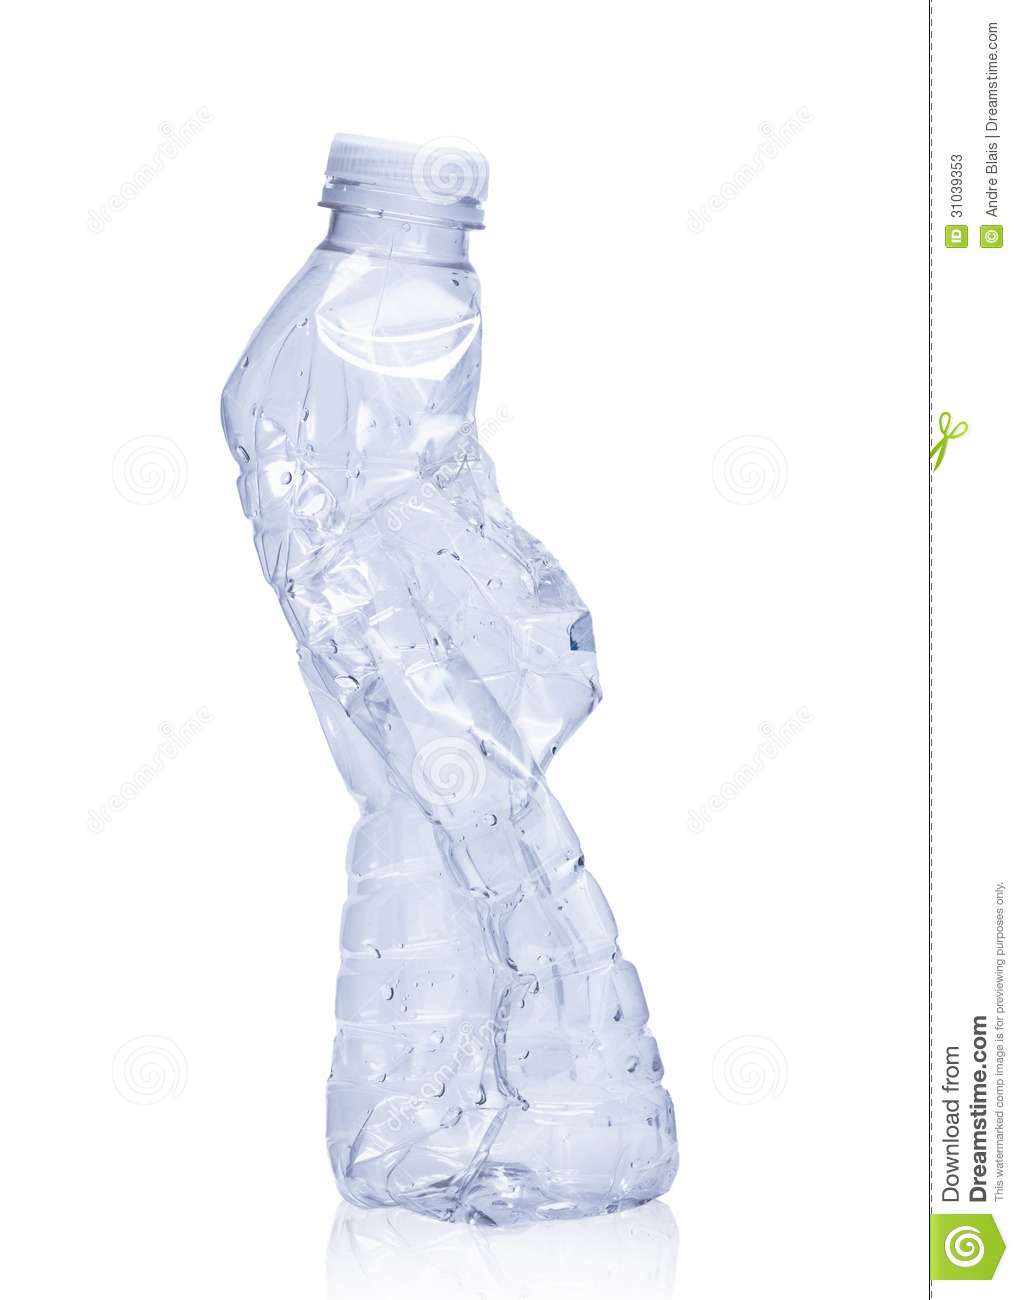 Empty Plastic Water Bottle For Recycling Isolated On White Background 